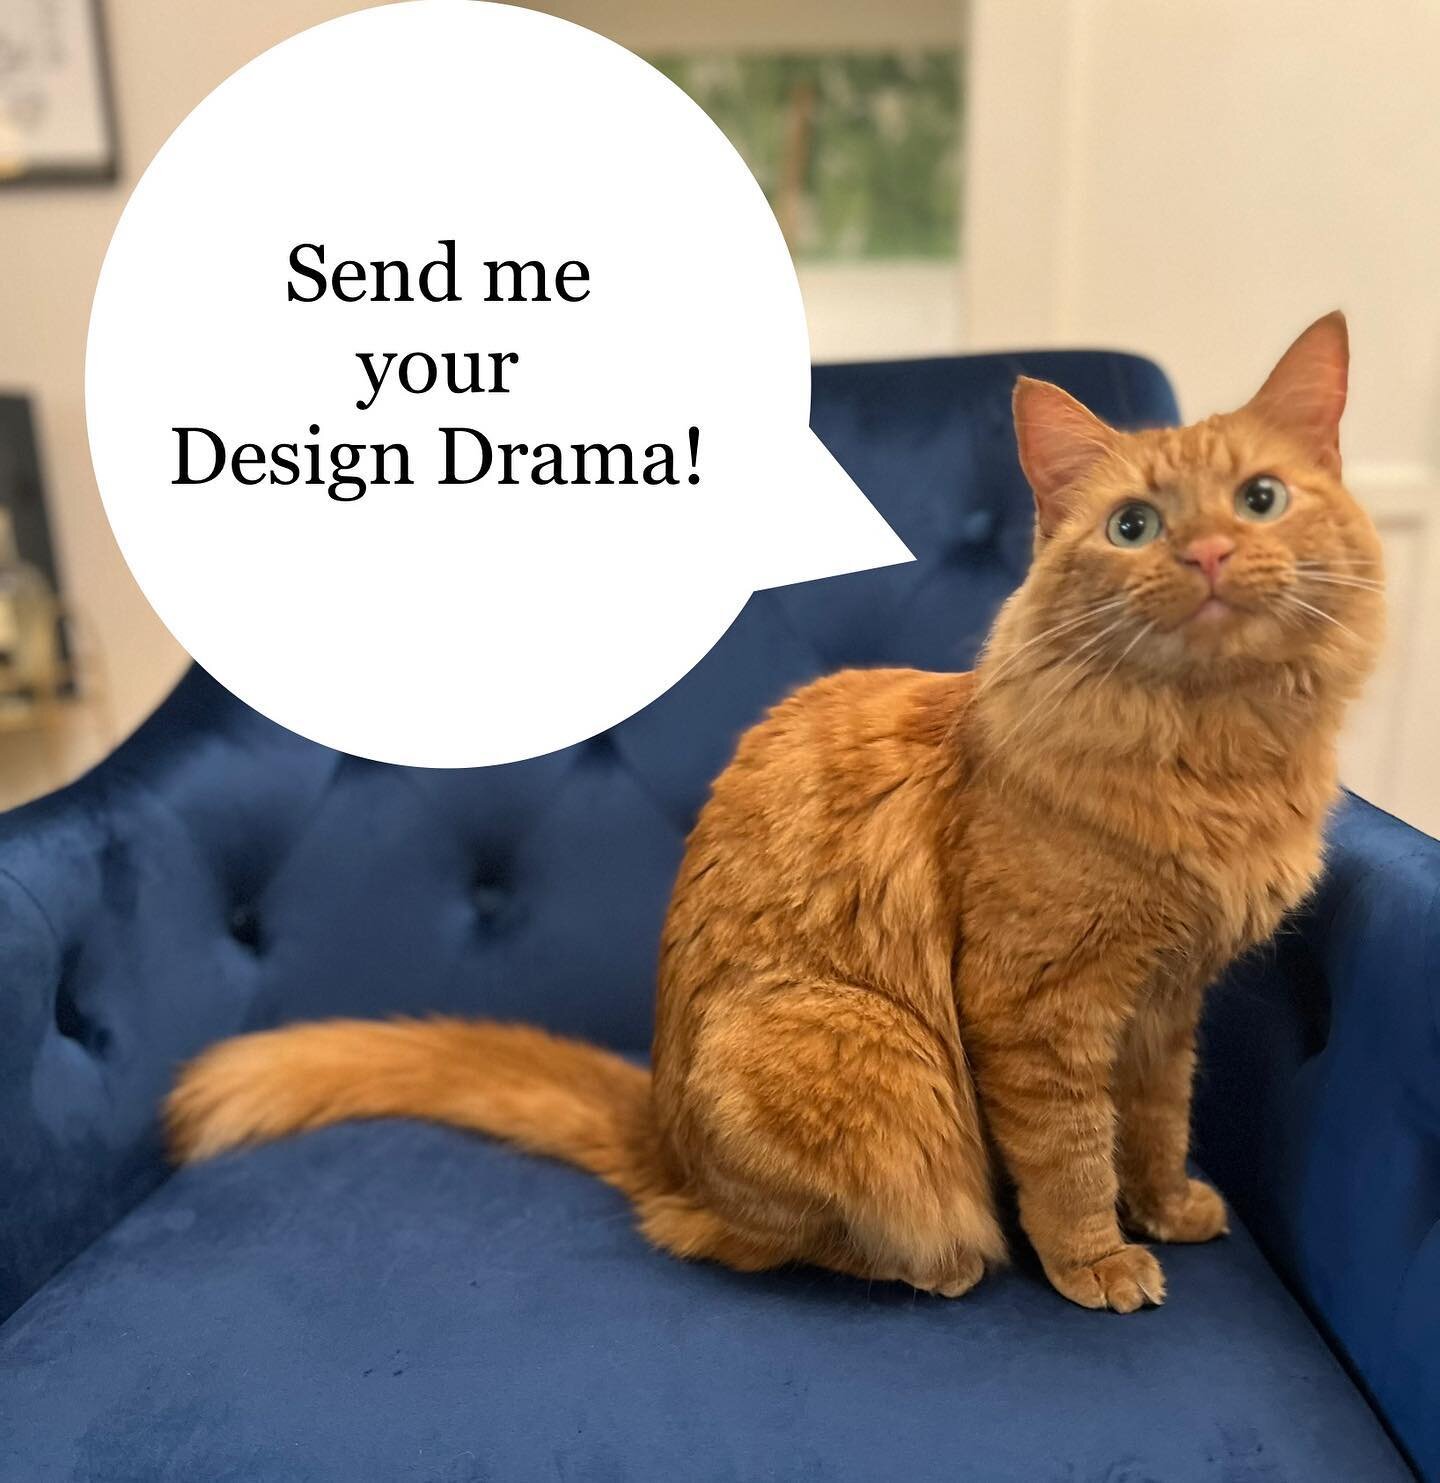 OPEN CALL 4 DESIGN DRAMA ⭐️

We&rsquo;re doing another round of Design Drama!

🔸Are you being terrorized by a blank wall?
🔸Is there a piece of furniture you emotionally can&rsquo;t part with but hate the look of? 
🔸Are you out of inspiration for t